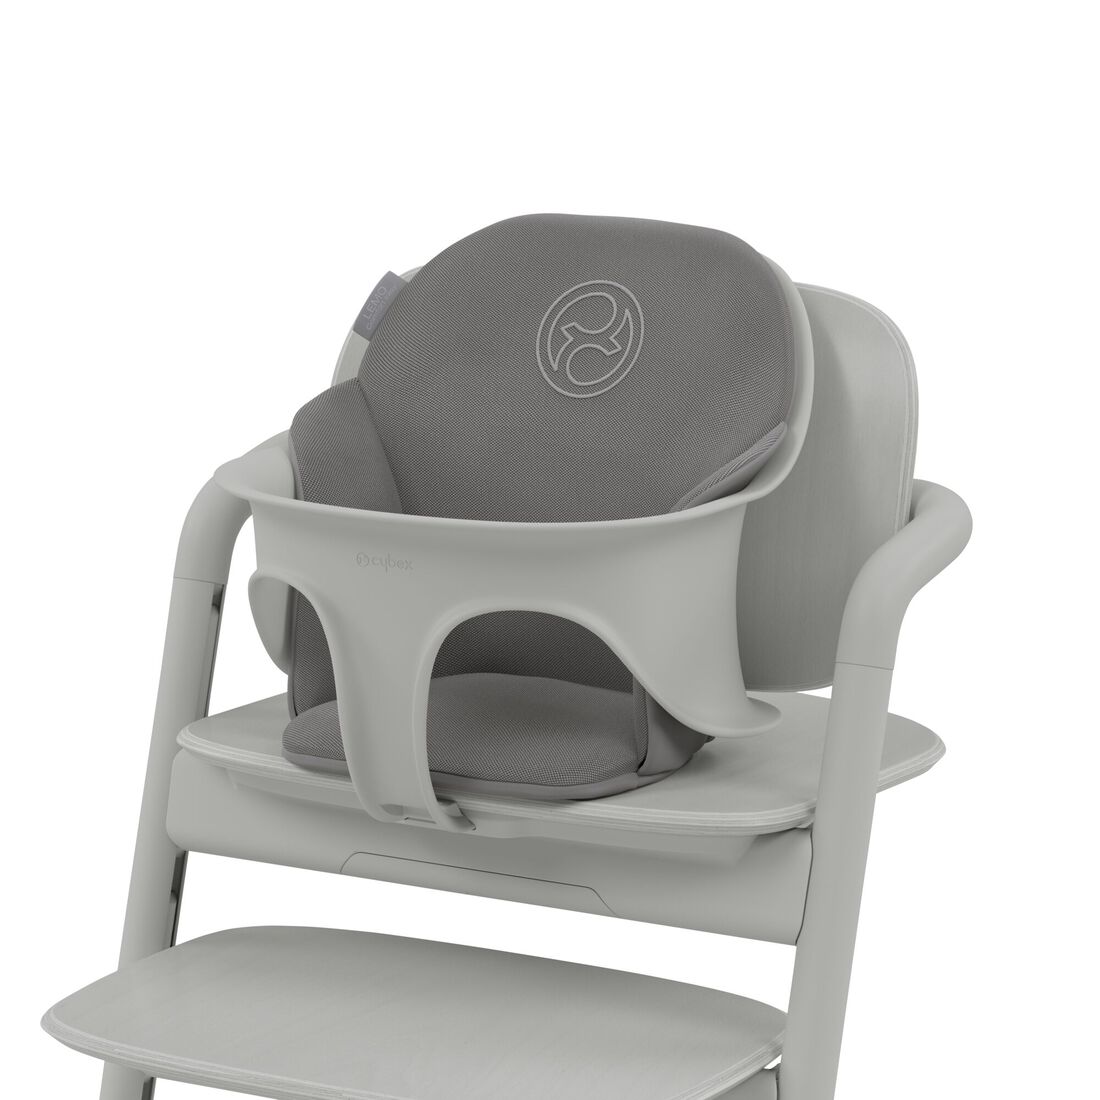 Order the Cybex Lemo High Chair Comfort Inlay online - Baby Plus